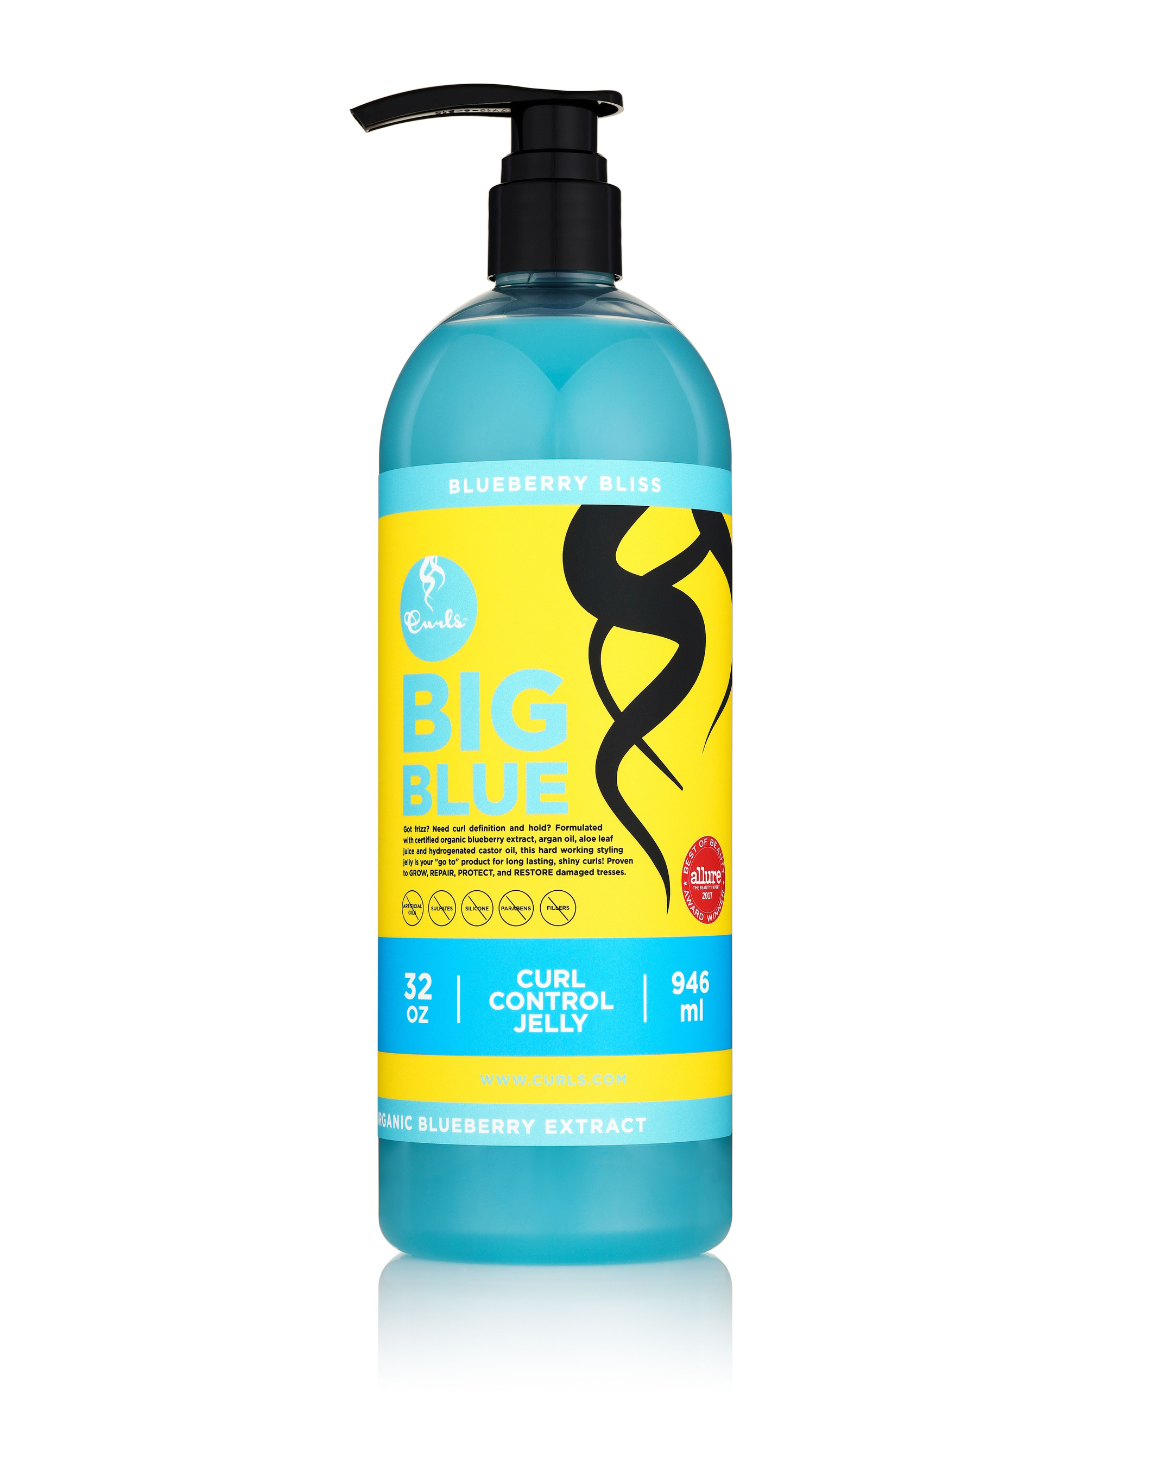 Blueberry Bliss Curl Control Jelly - Hair Gel for Curls